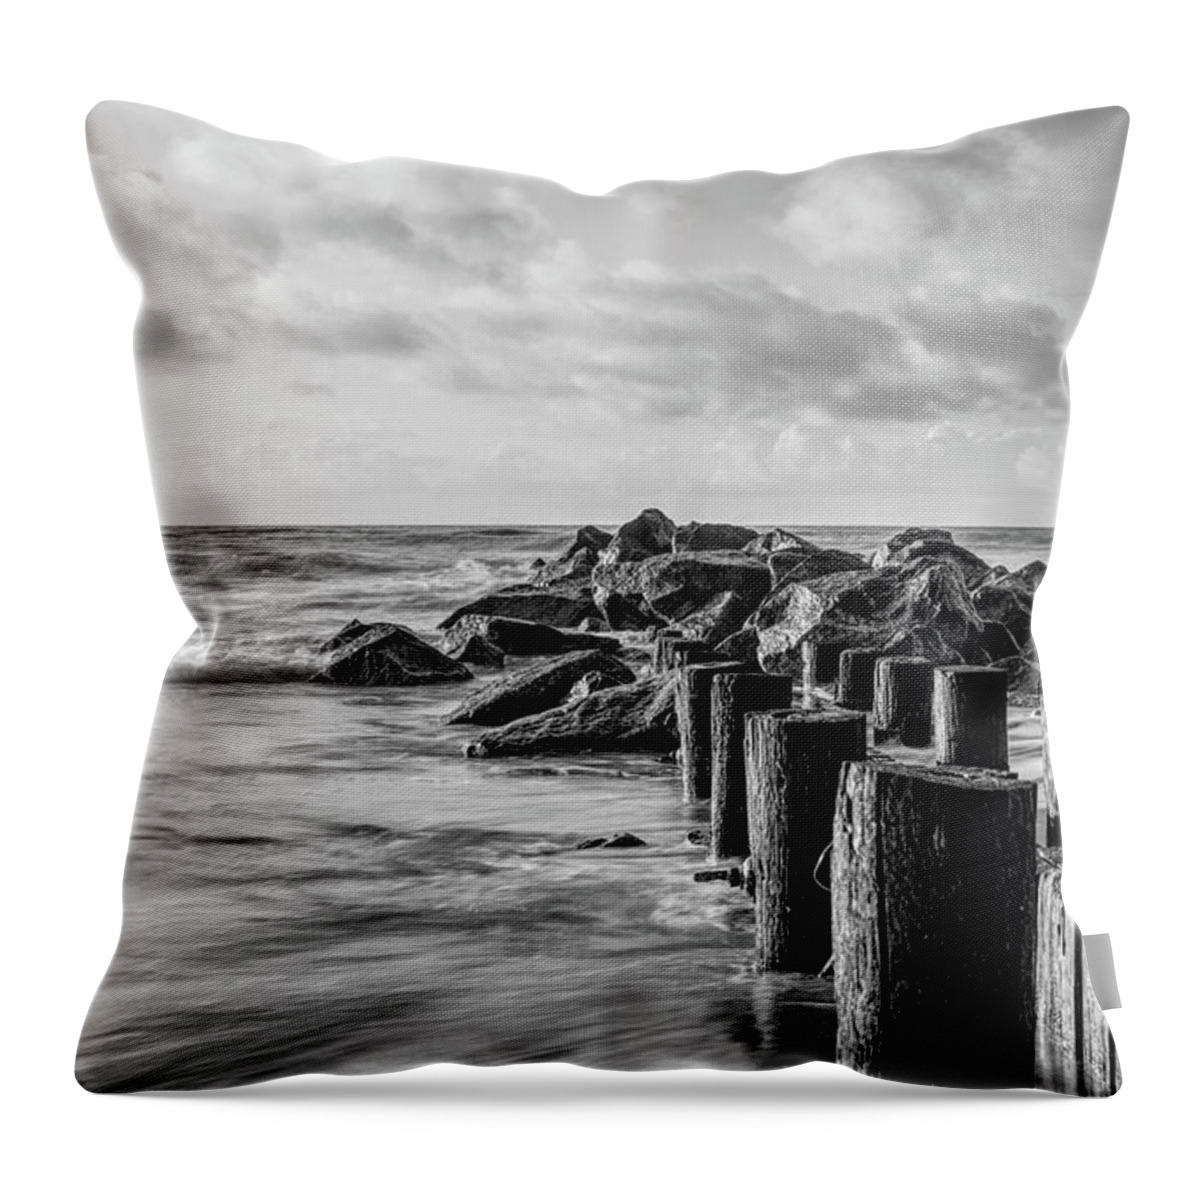 Atlantic Throw Pillow featuring the photograph Dreamy Jettie Grayscale by Jennifer White